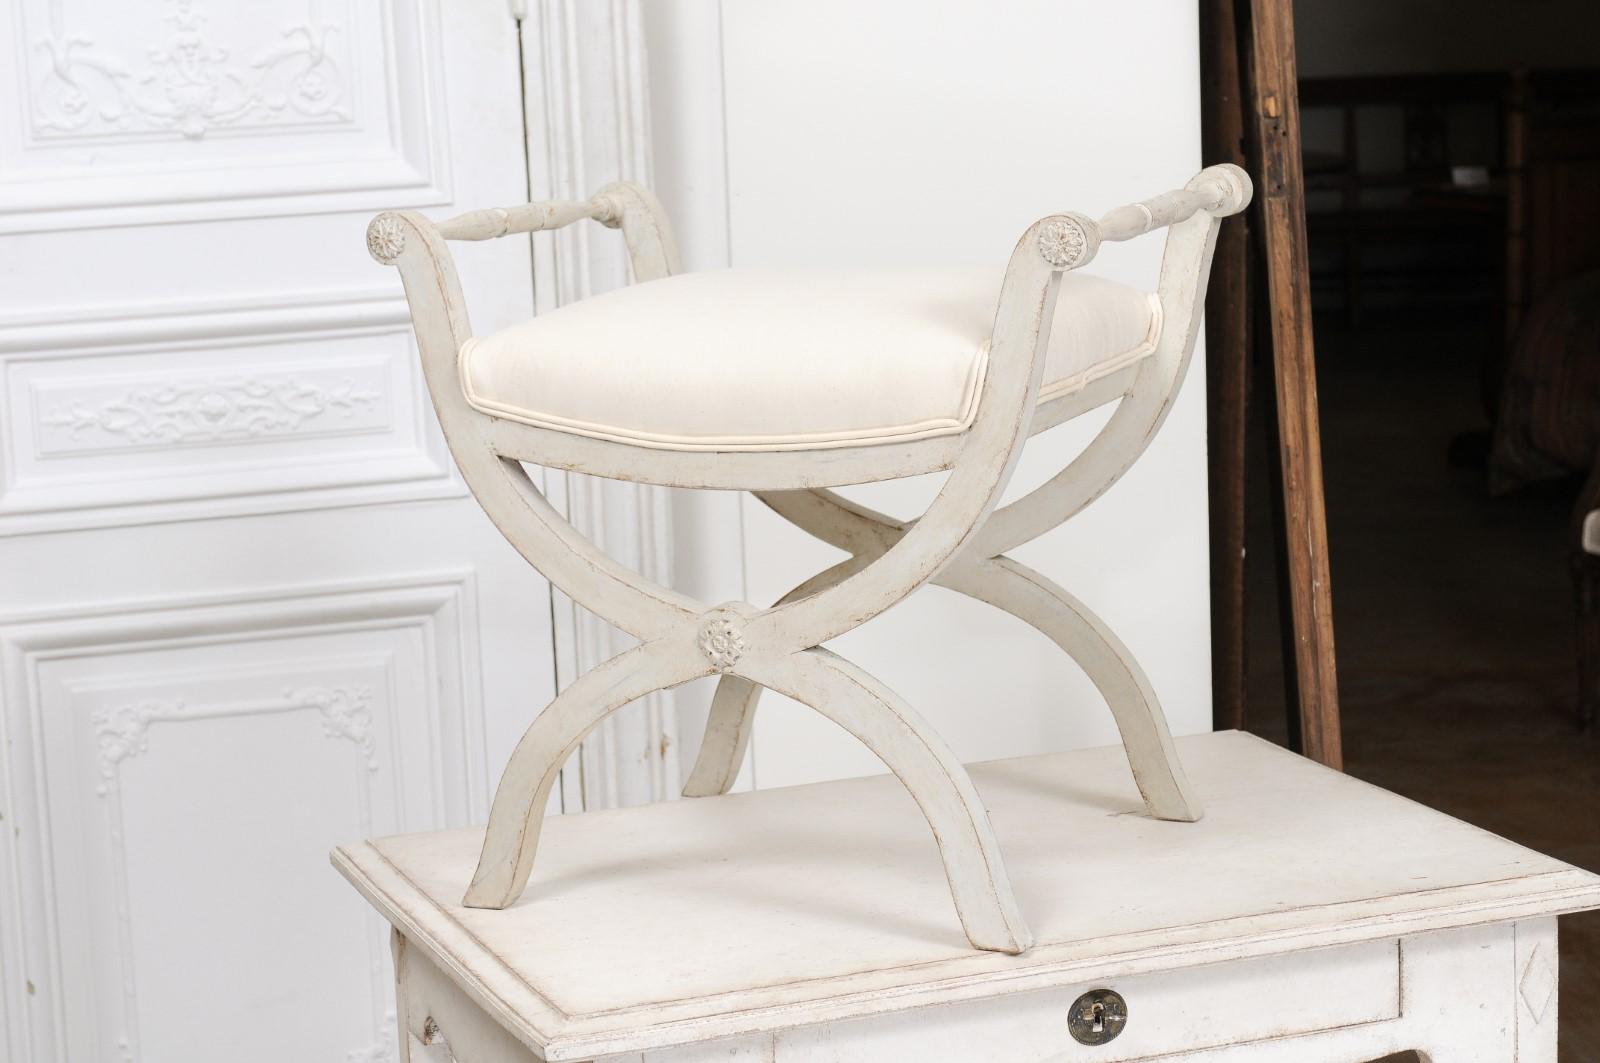 Swedish 1830s Empire Style Painted and Upholstered Stool with Spindle Arms For Sale 3